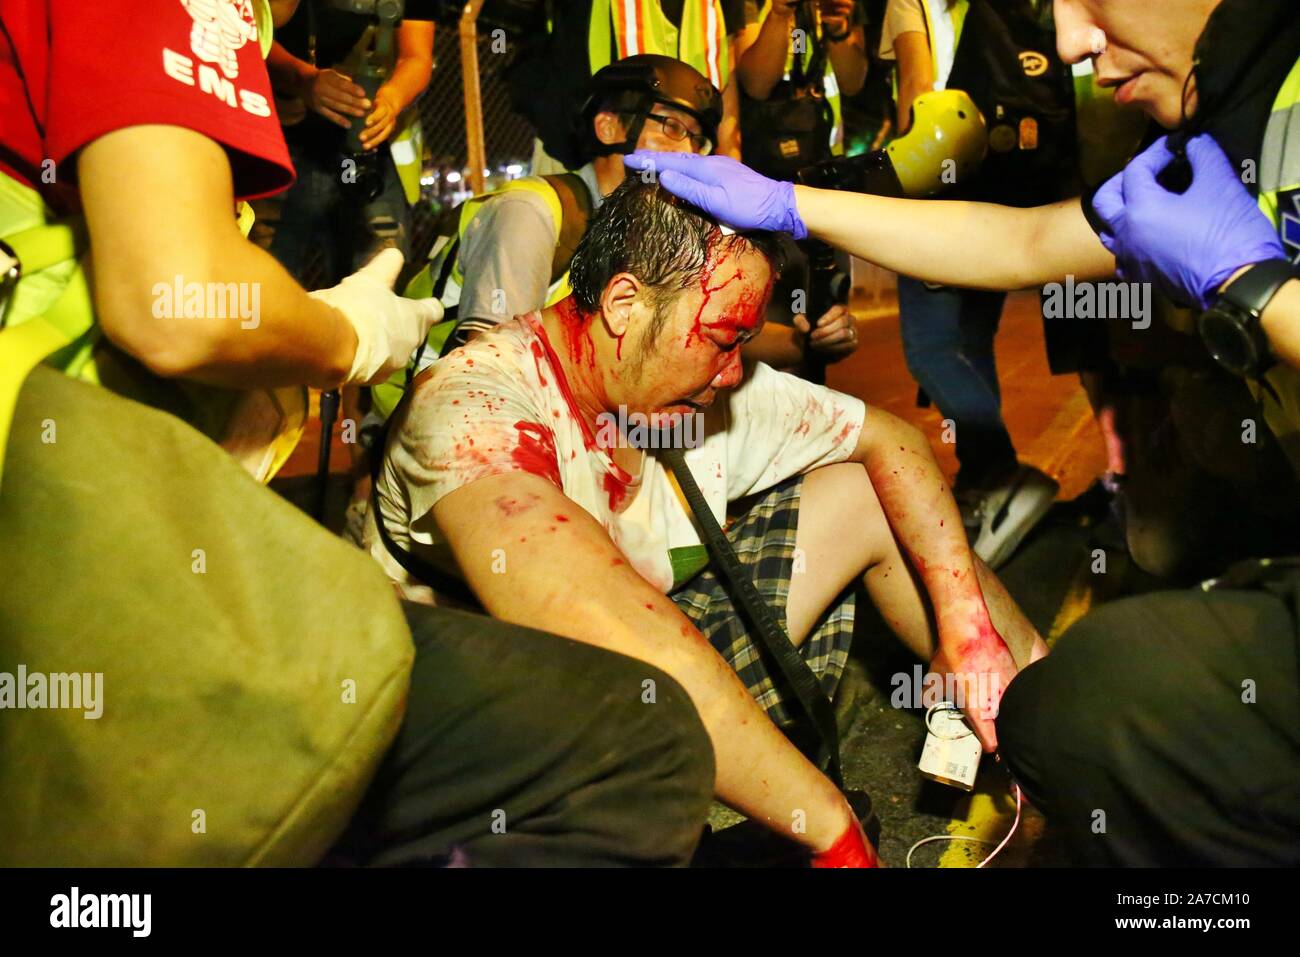 Hong Kong, China. 1st Nov, 2019. Thousands of people wearing masks and costumes marched through Hong Kong's city centre on Halloween night and ended up in the district of Lan Kwai Fong in Central. After midnight clashes broke out and police fired tear gas to clear the streets. Here a driver is attacked by protesters when he tries to drive through the road blocks and hits the crowds. Credit: Gonzales Photo/Alamy Live News Stock Photo